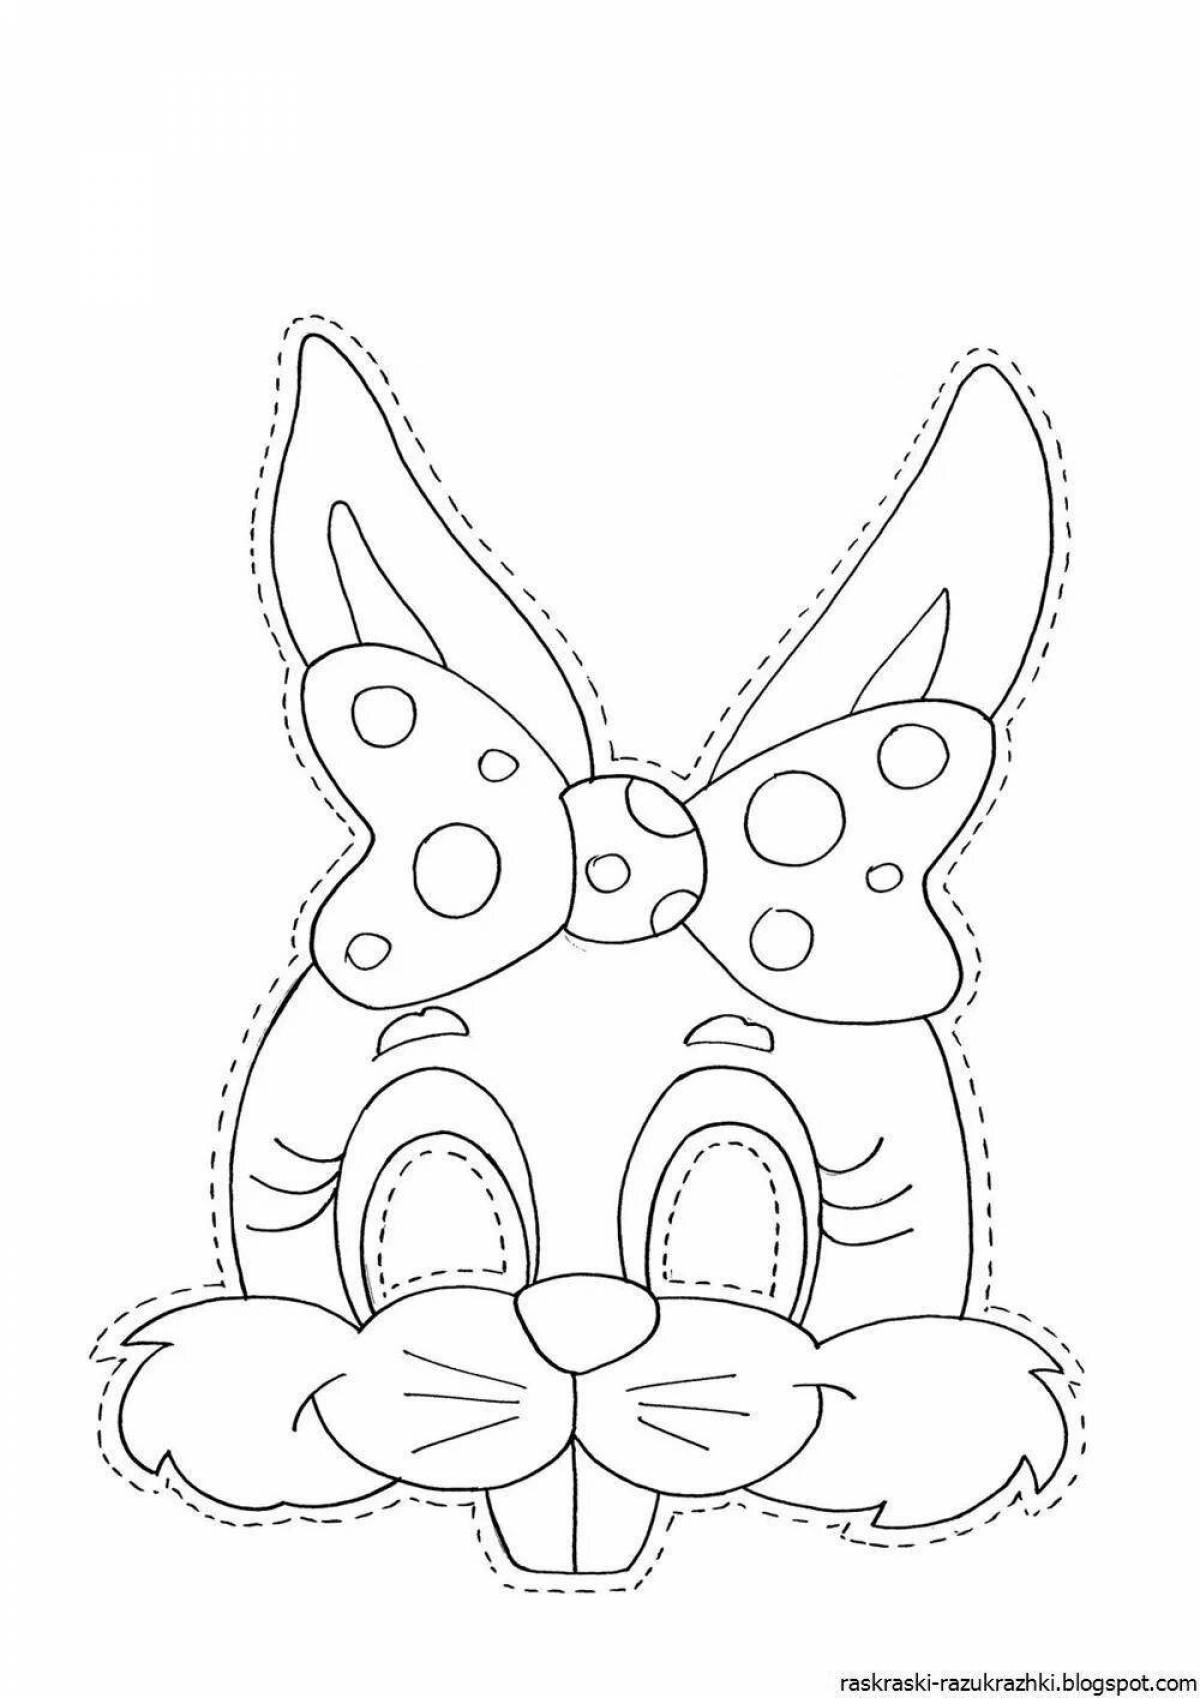 Exquisite masks coloring pages for kids